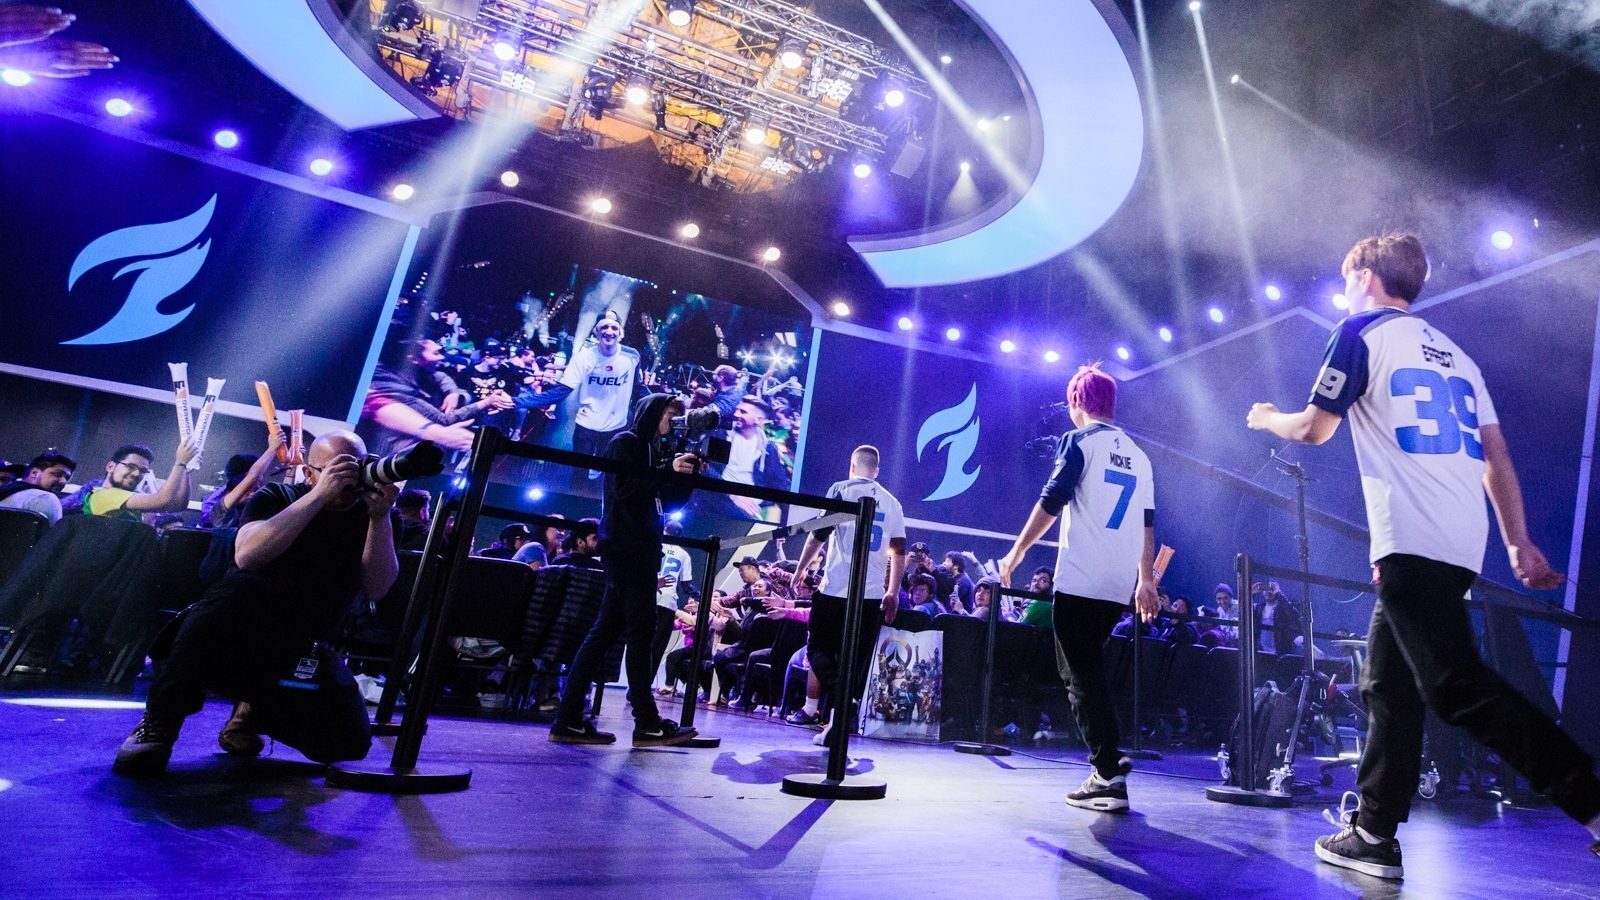 The Dallas Fuel will host 16 university level Overwatch teams in a massive one-day tournament (Photo via Blizzard Entertainment).